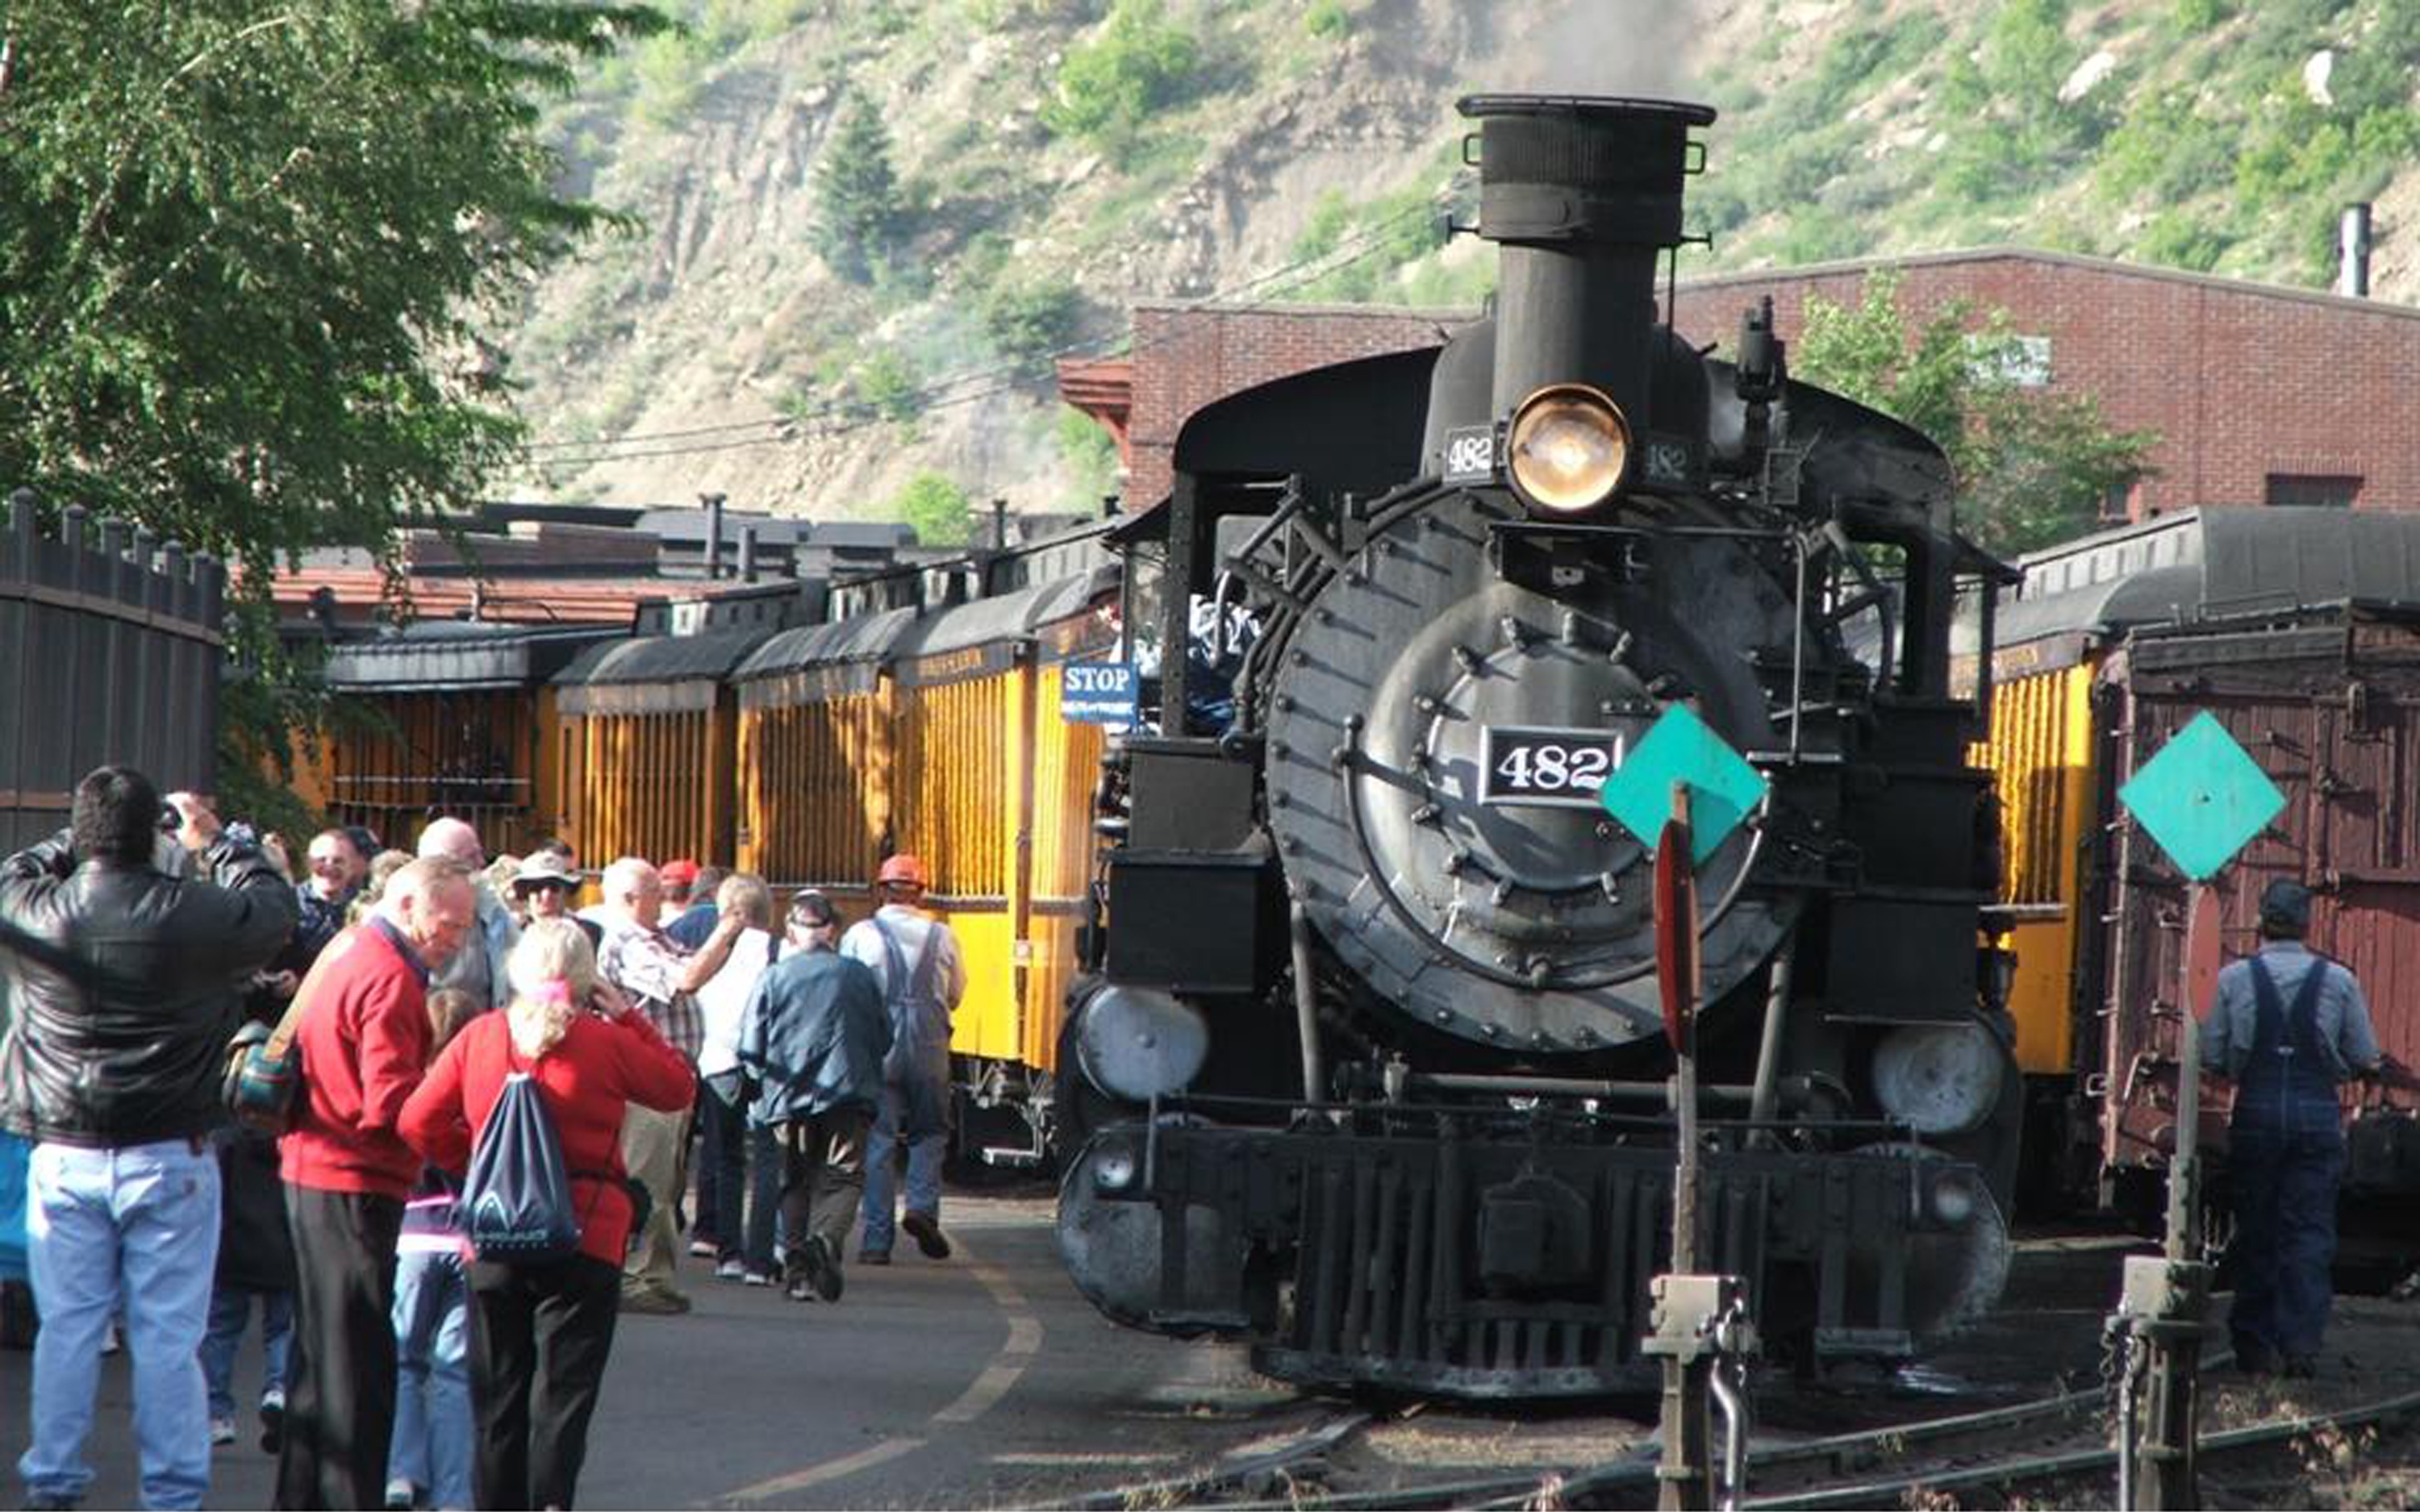 Originally used to transport ore to local smelters, the Durango and Silverton Narrow Gauge Railroad transports over 200,000 tourists annually to visit the historic towns and enjoy stunning mountain vistas